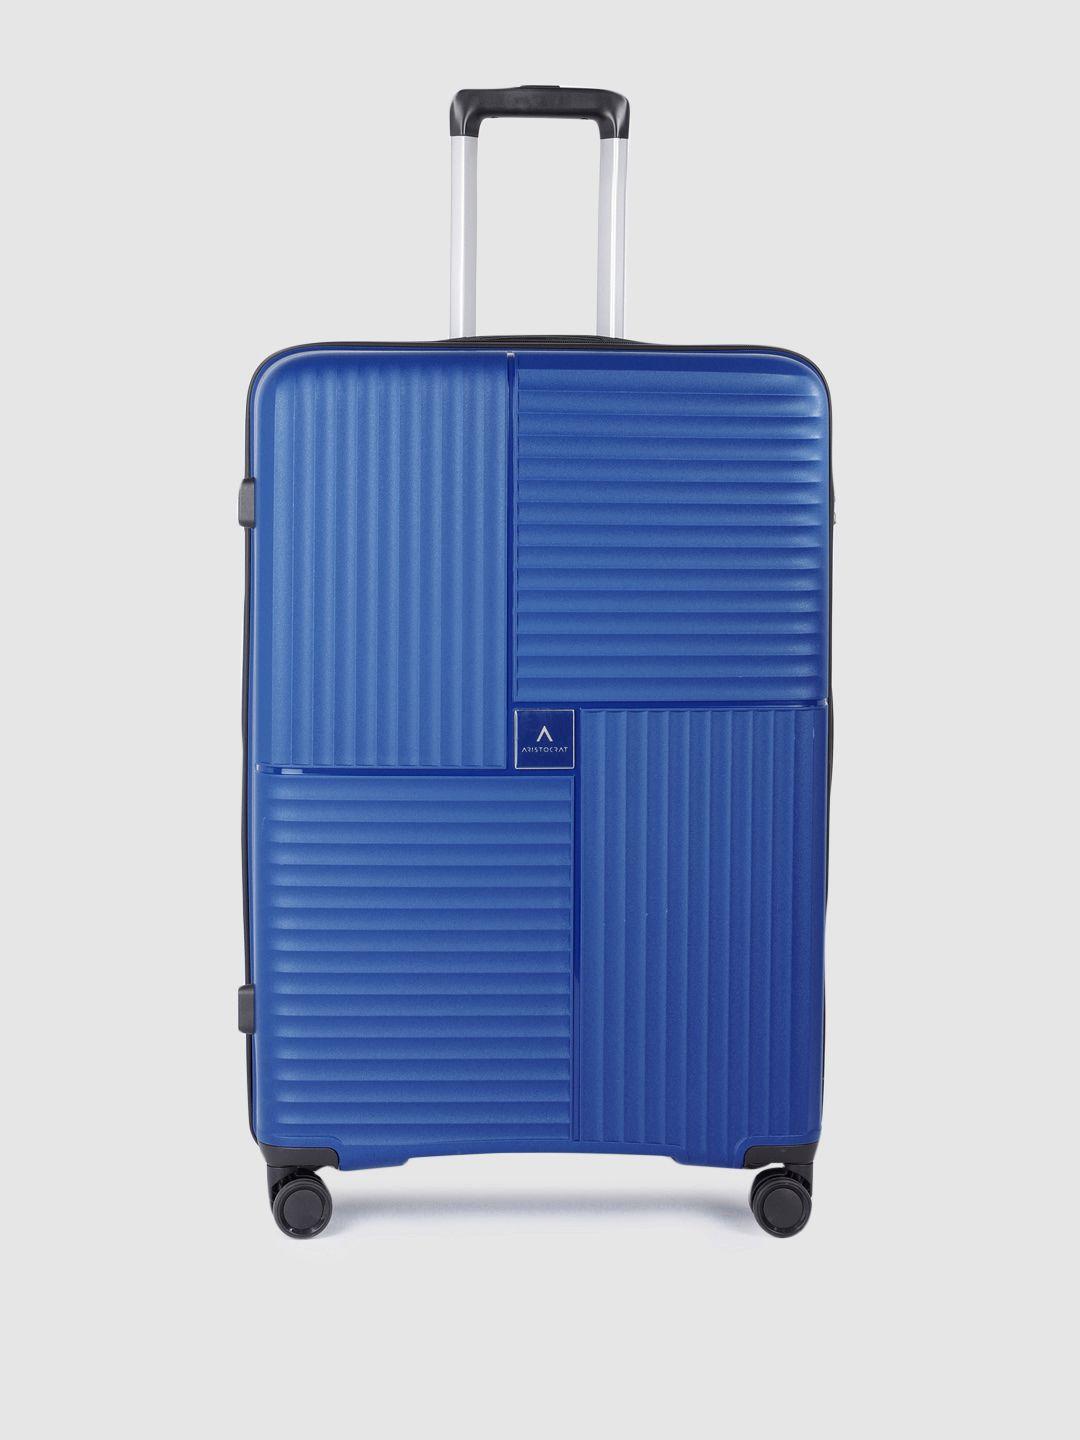 aristocrat textured hard-sided large trolley suitcase